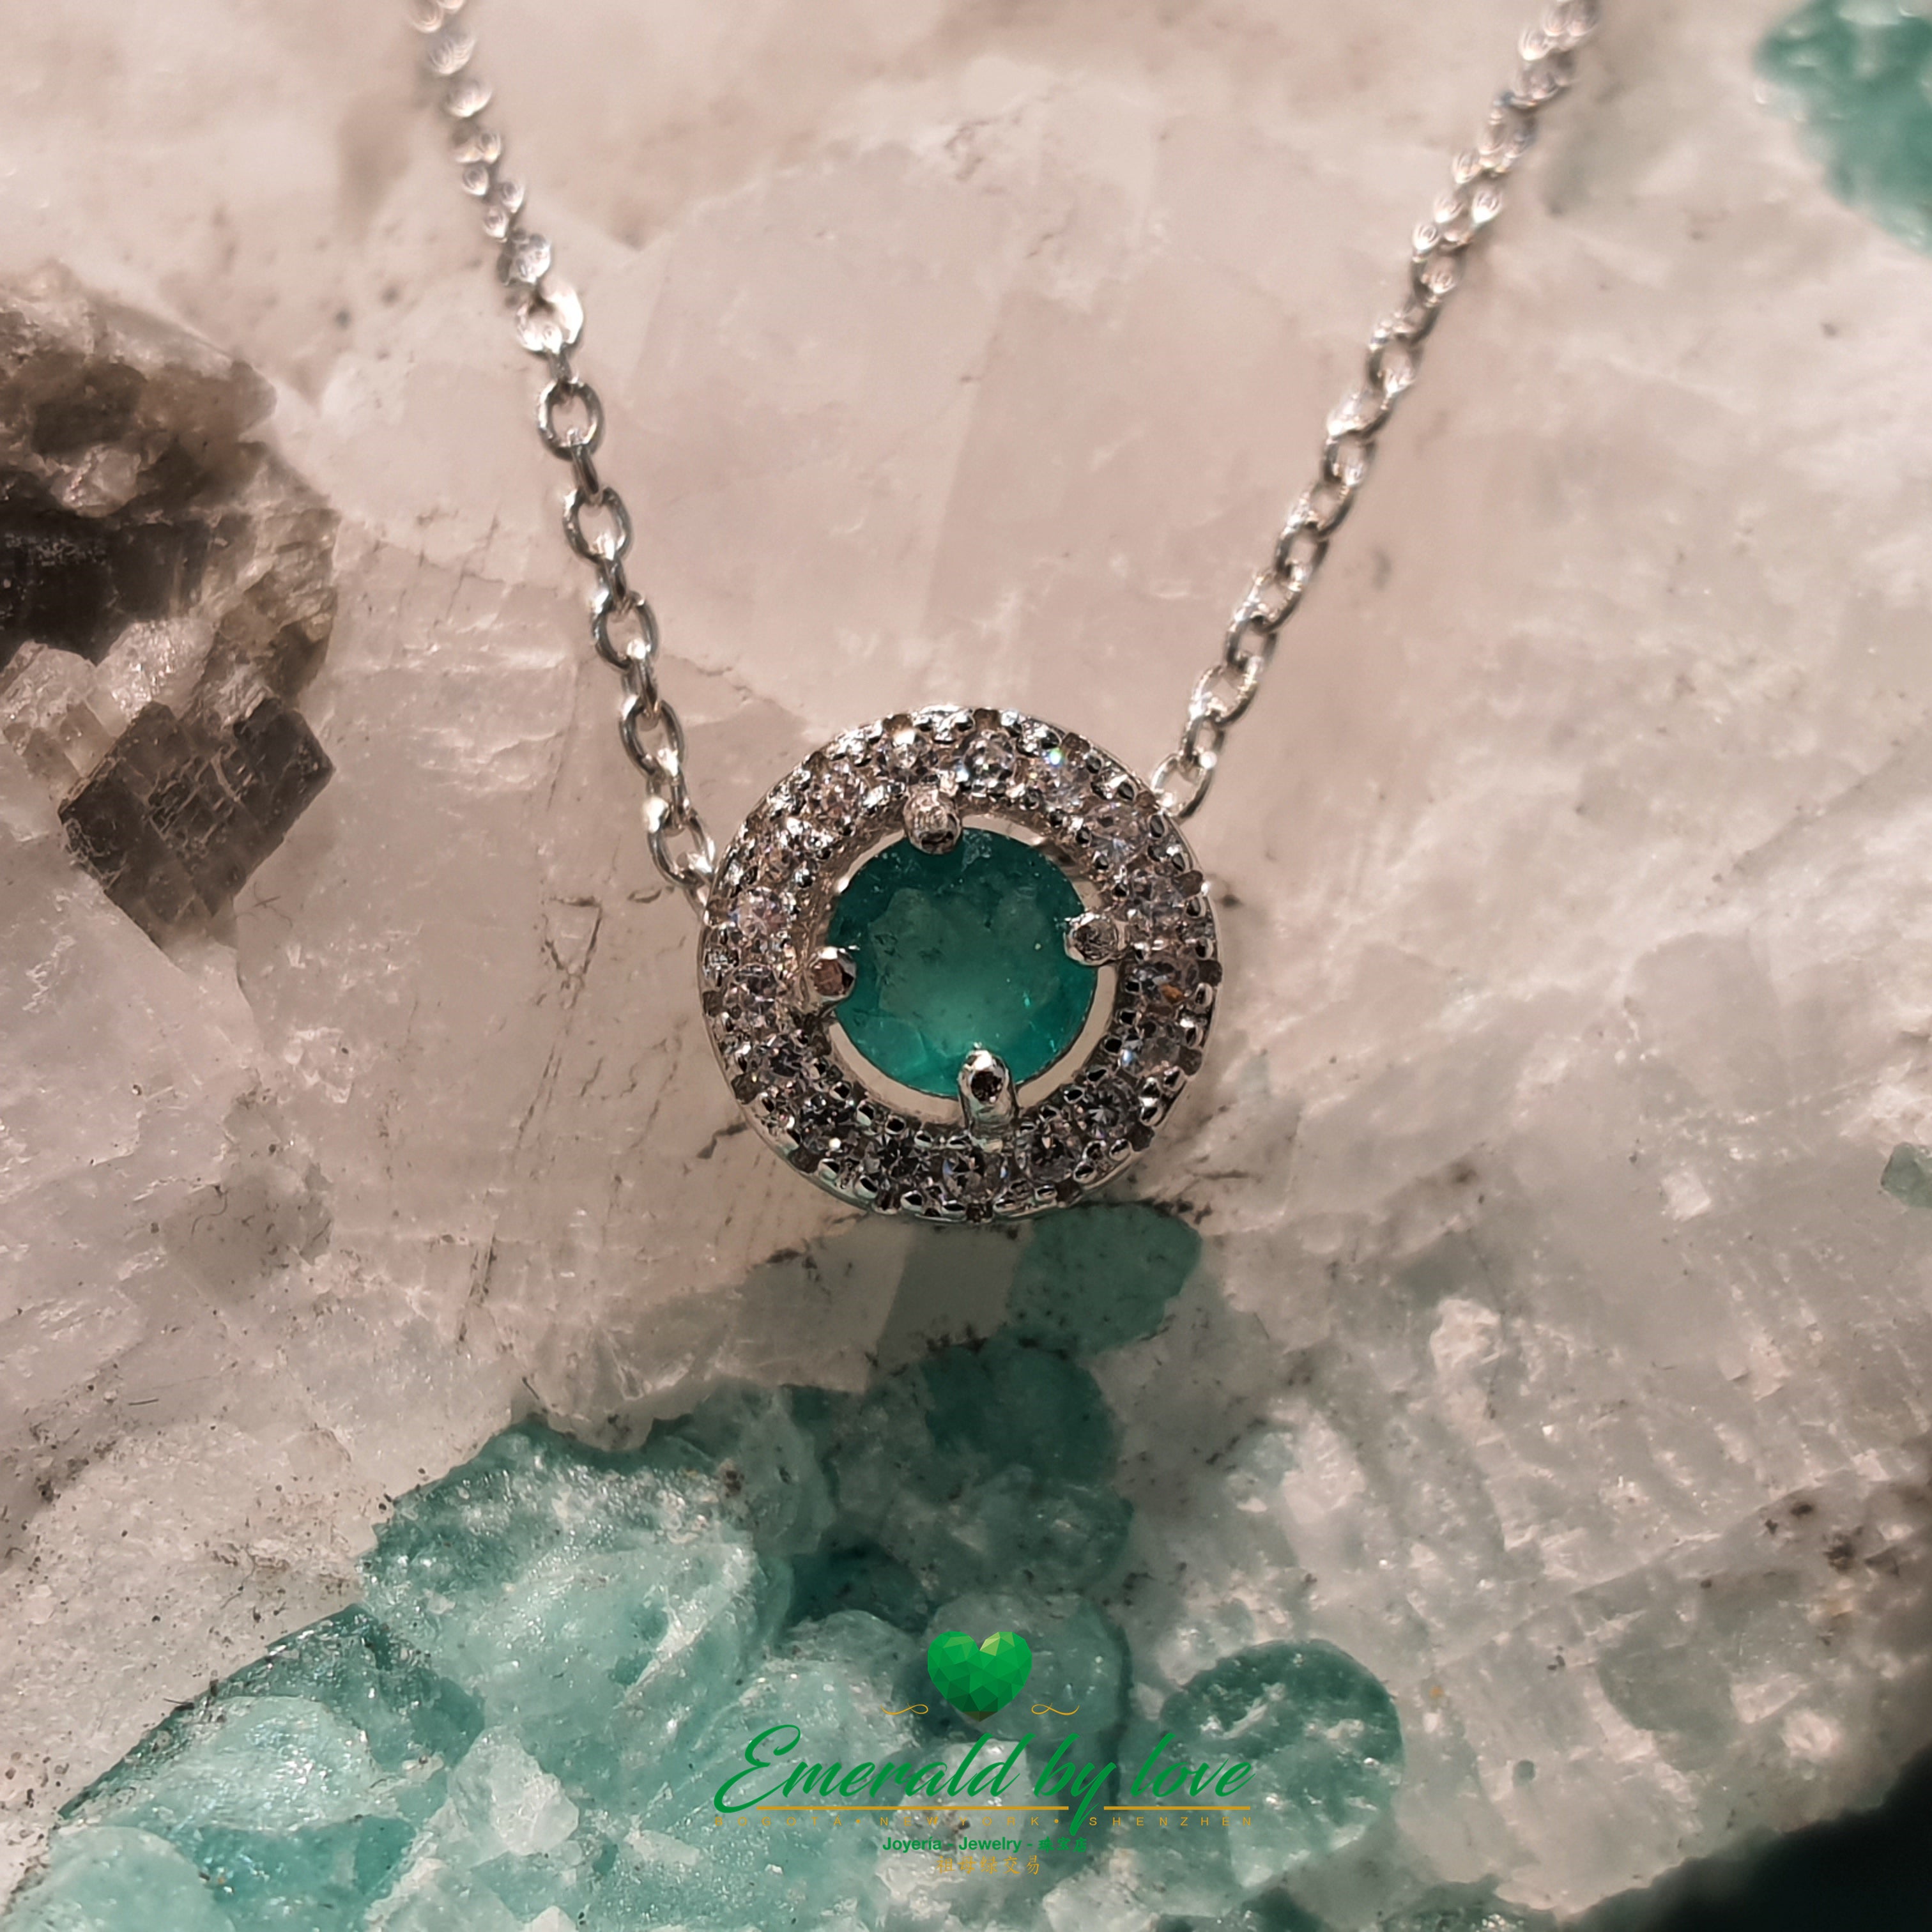 Circular Pendant with Halo of Cubic Zirconia and Central Round Crystal Emerald